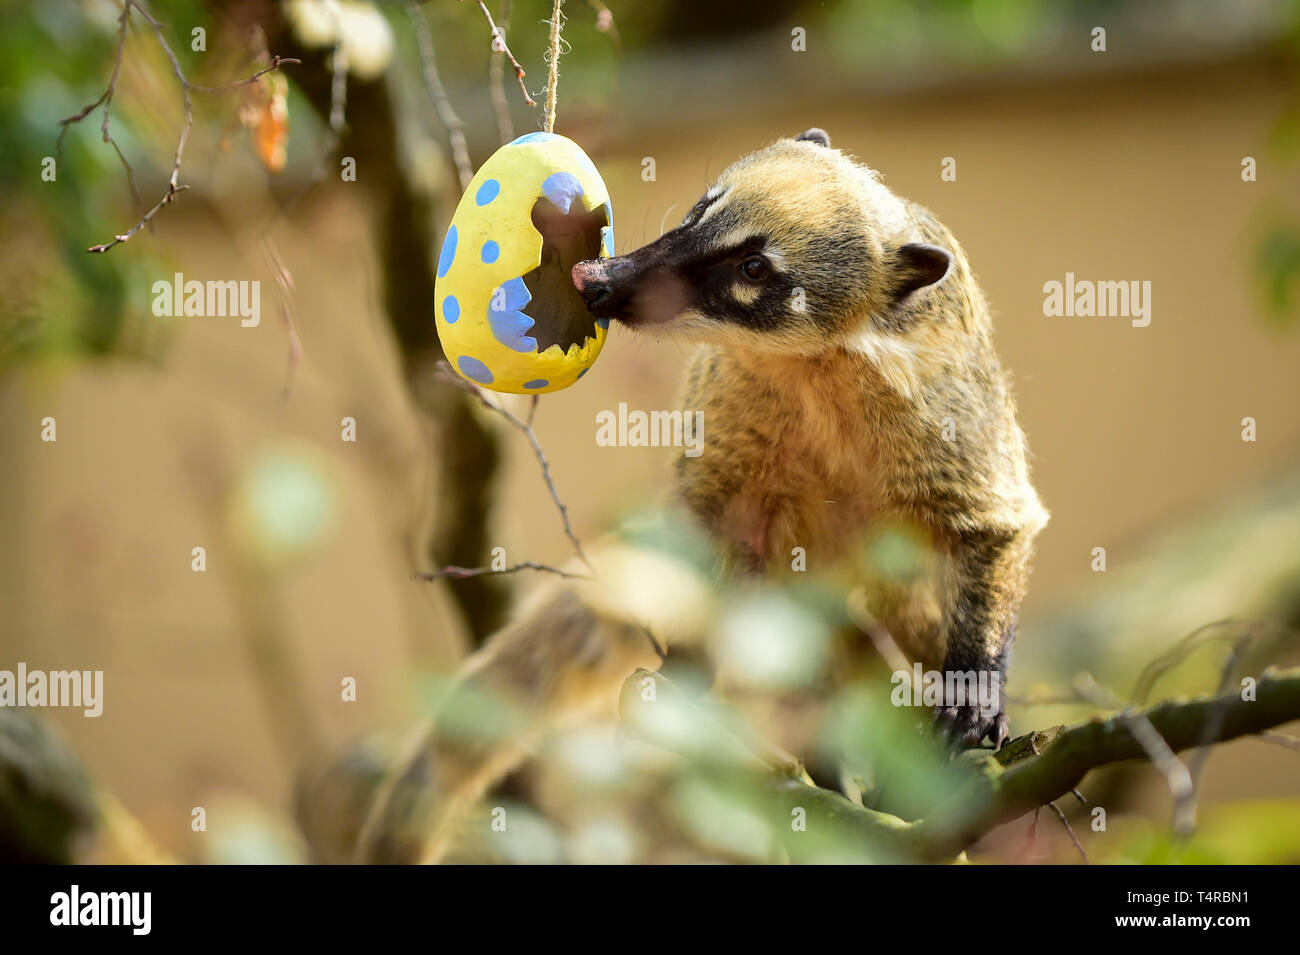 London, UK.  18 April 2019.  Colourful papier-mâché eggs filled with tasty treats are offered to ring-tailed coatis at ZSL London Zoo in the run up to Easter.  Credit: Stephen Chung / Alamy Live News Stock Photo